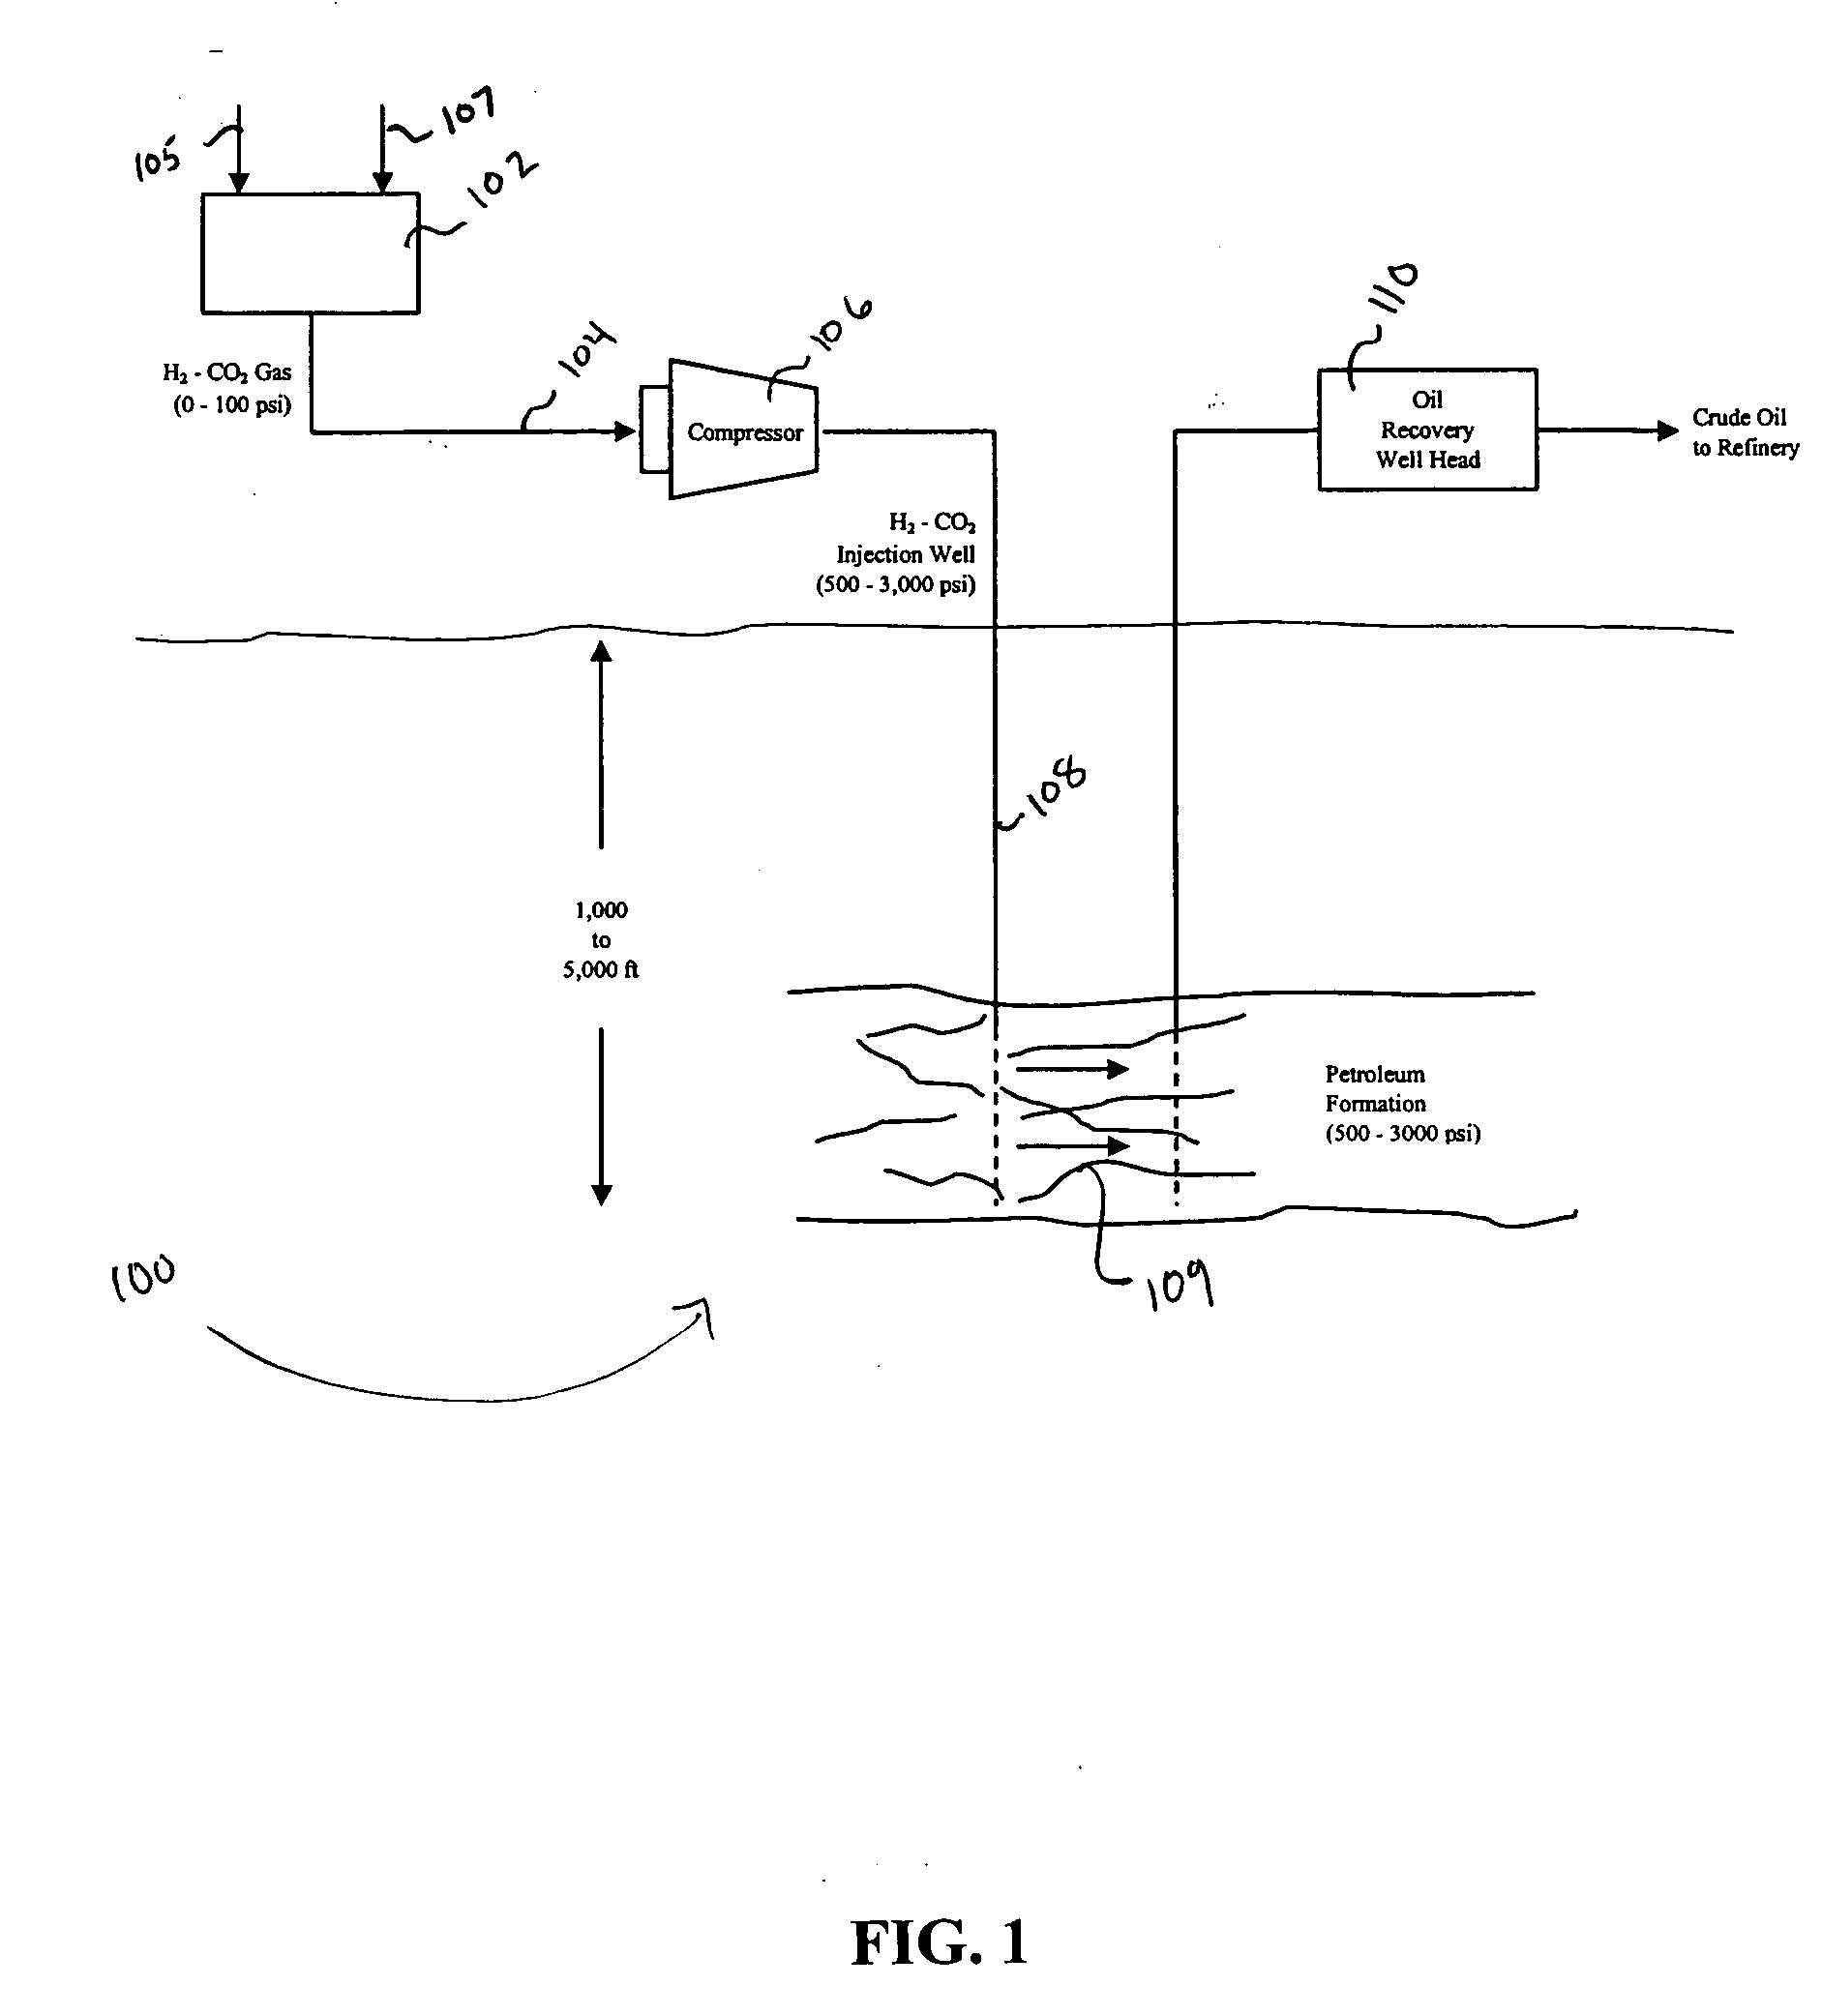 Apparatus and method for extracting petroleum from underground sites using reformed gases